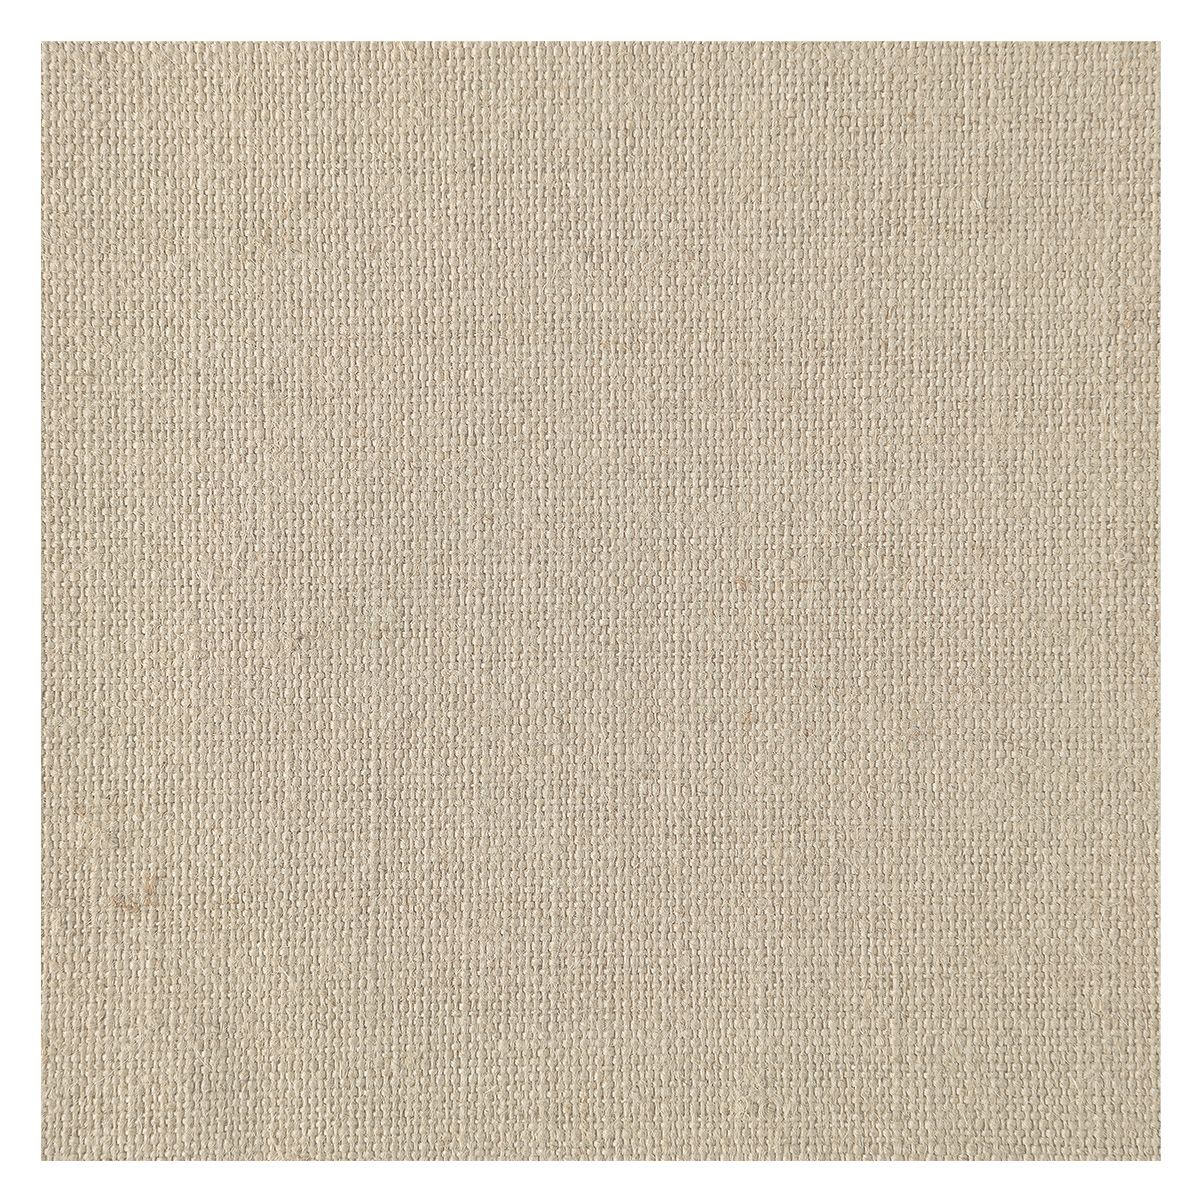 J Linen,  9.53 oz (323 gsm), tightly woven texture ideal for most painting genres